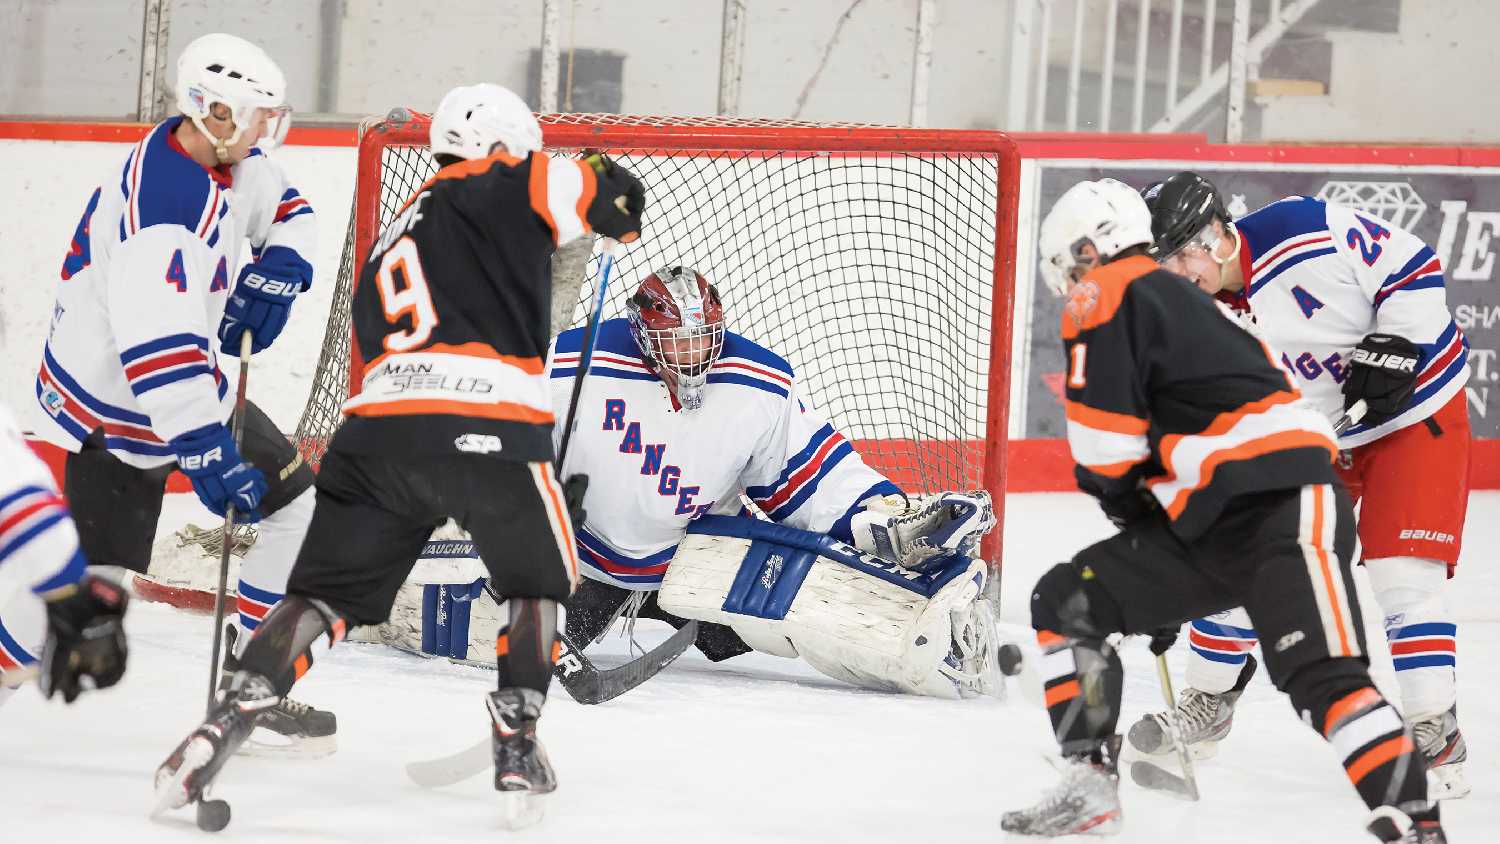 The Rangers in a game against the Rocanville Tigers in the Sask East Hockey League last winter before the remainder of the season was cancelled.